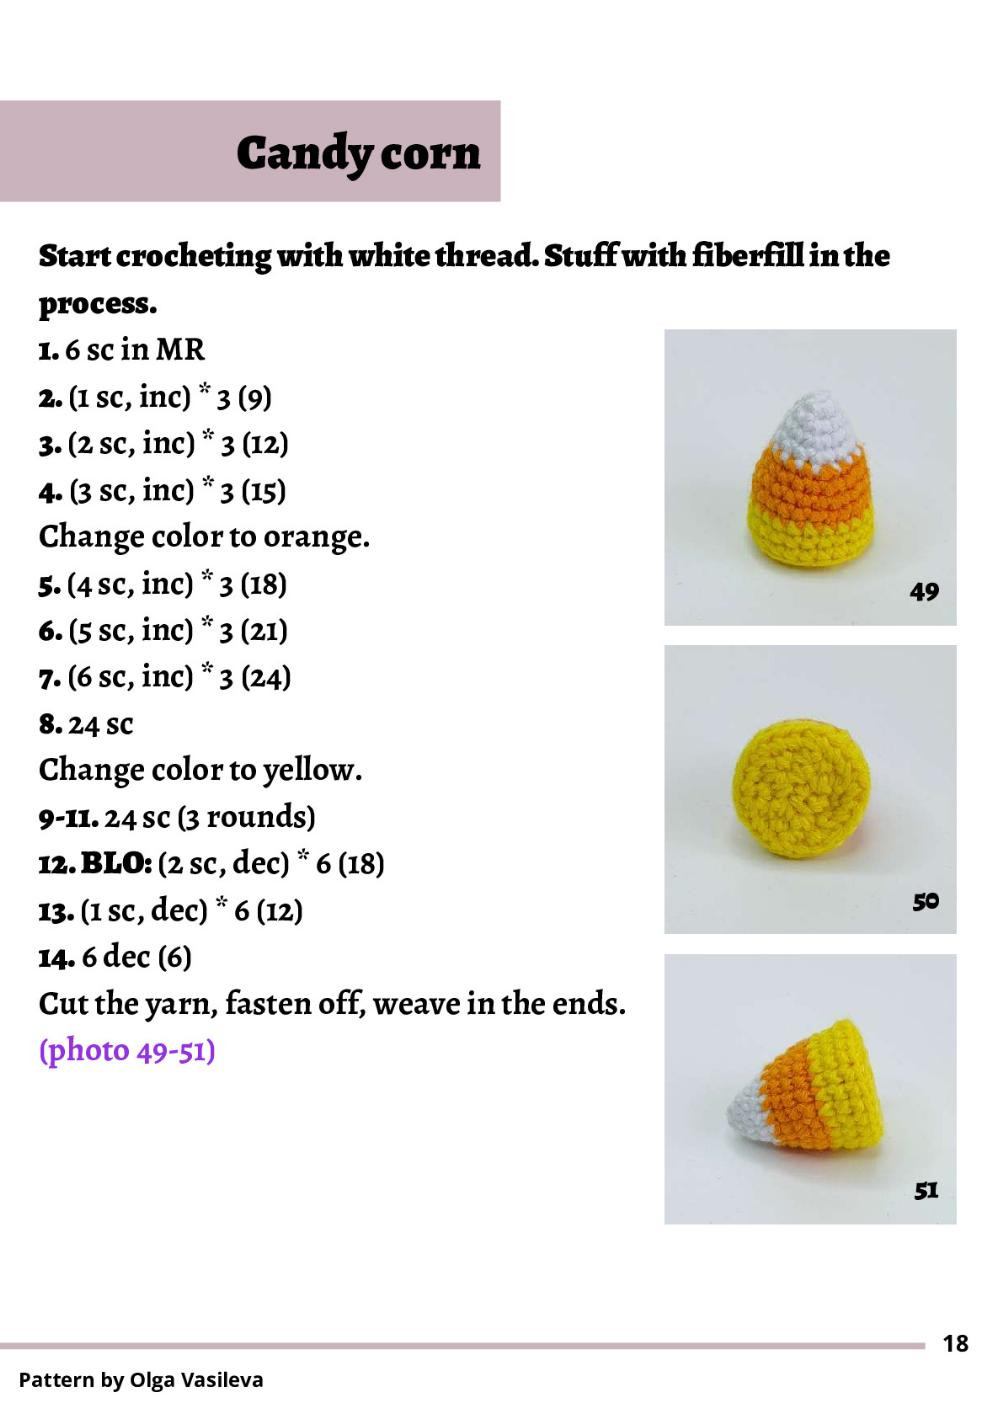 cocktails and candy corn crochet pattern